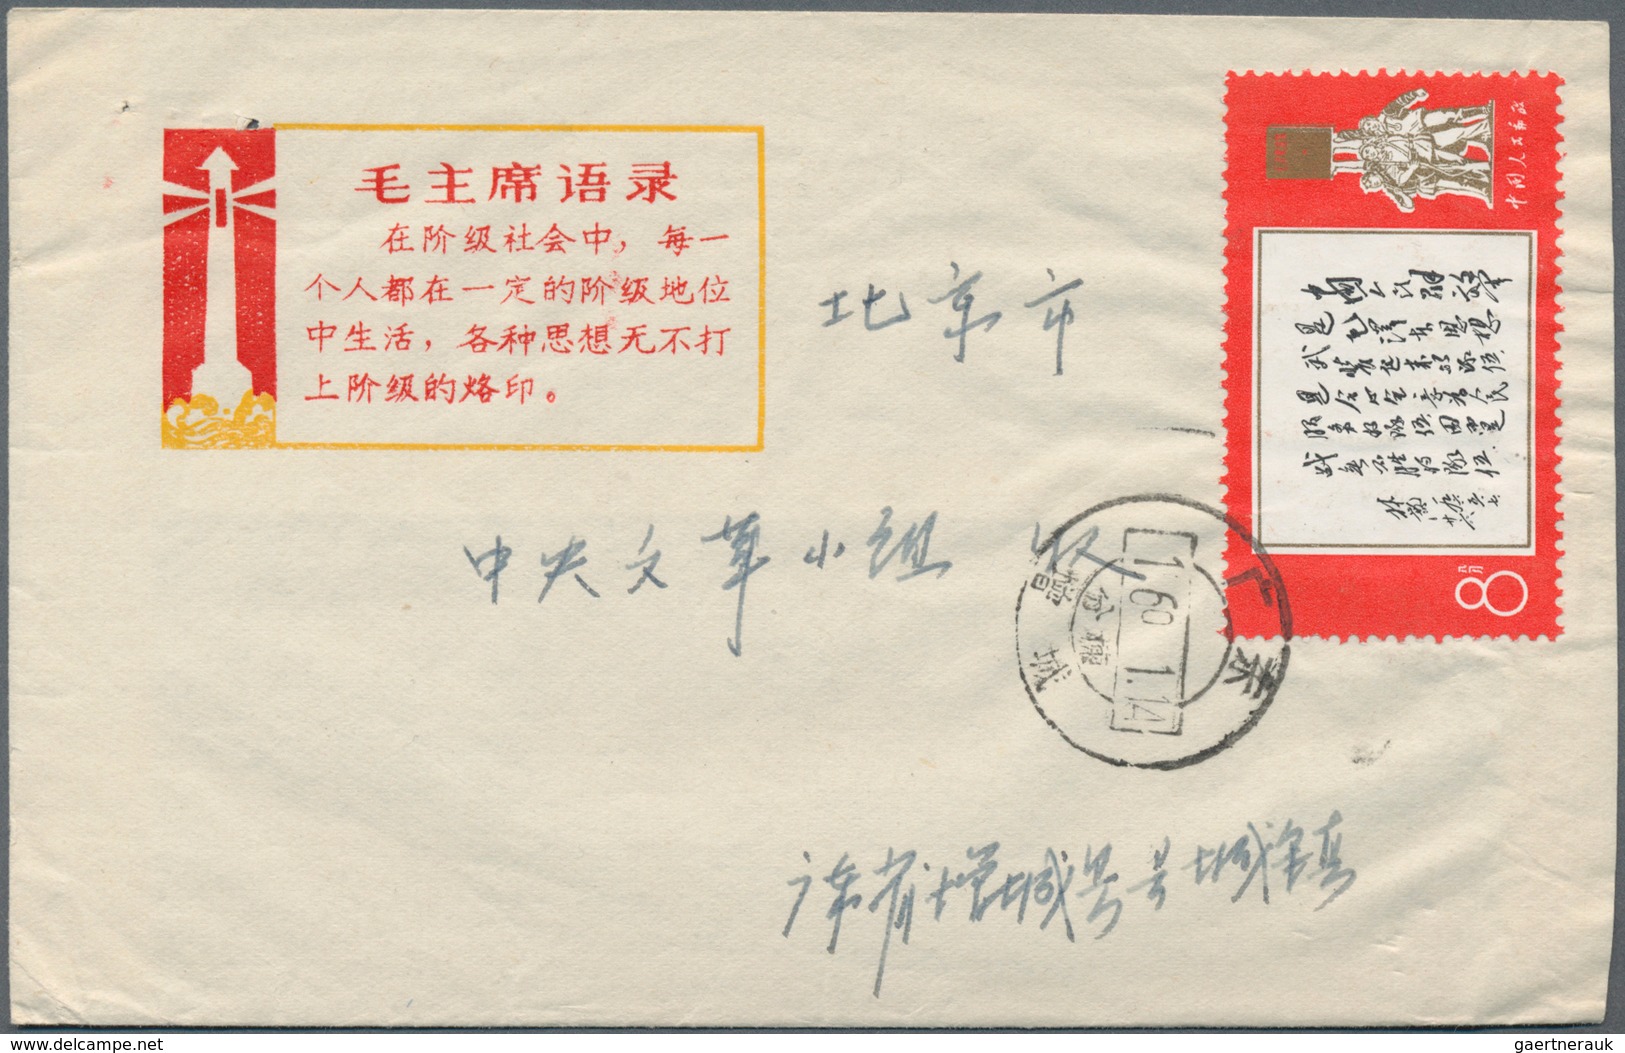 China - Volksrepublik: 1960-80, 20 covers / cards with attractive frankings including Mao's cultural